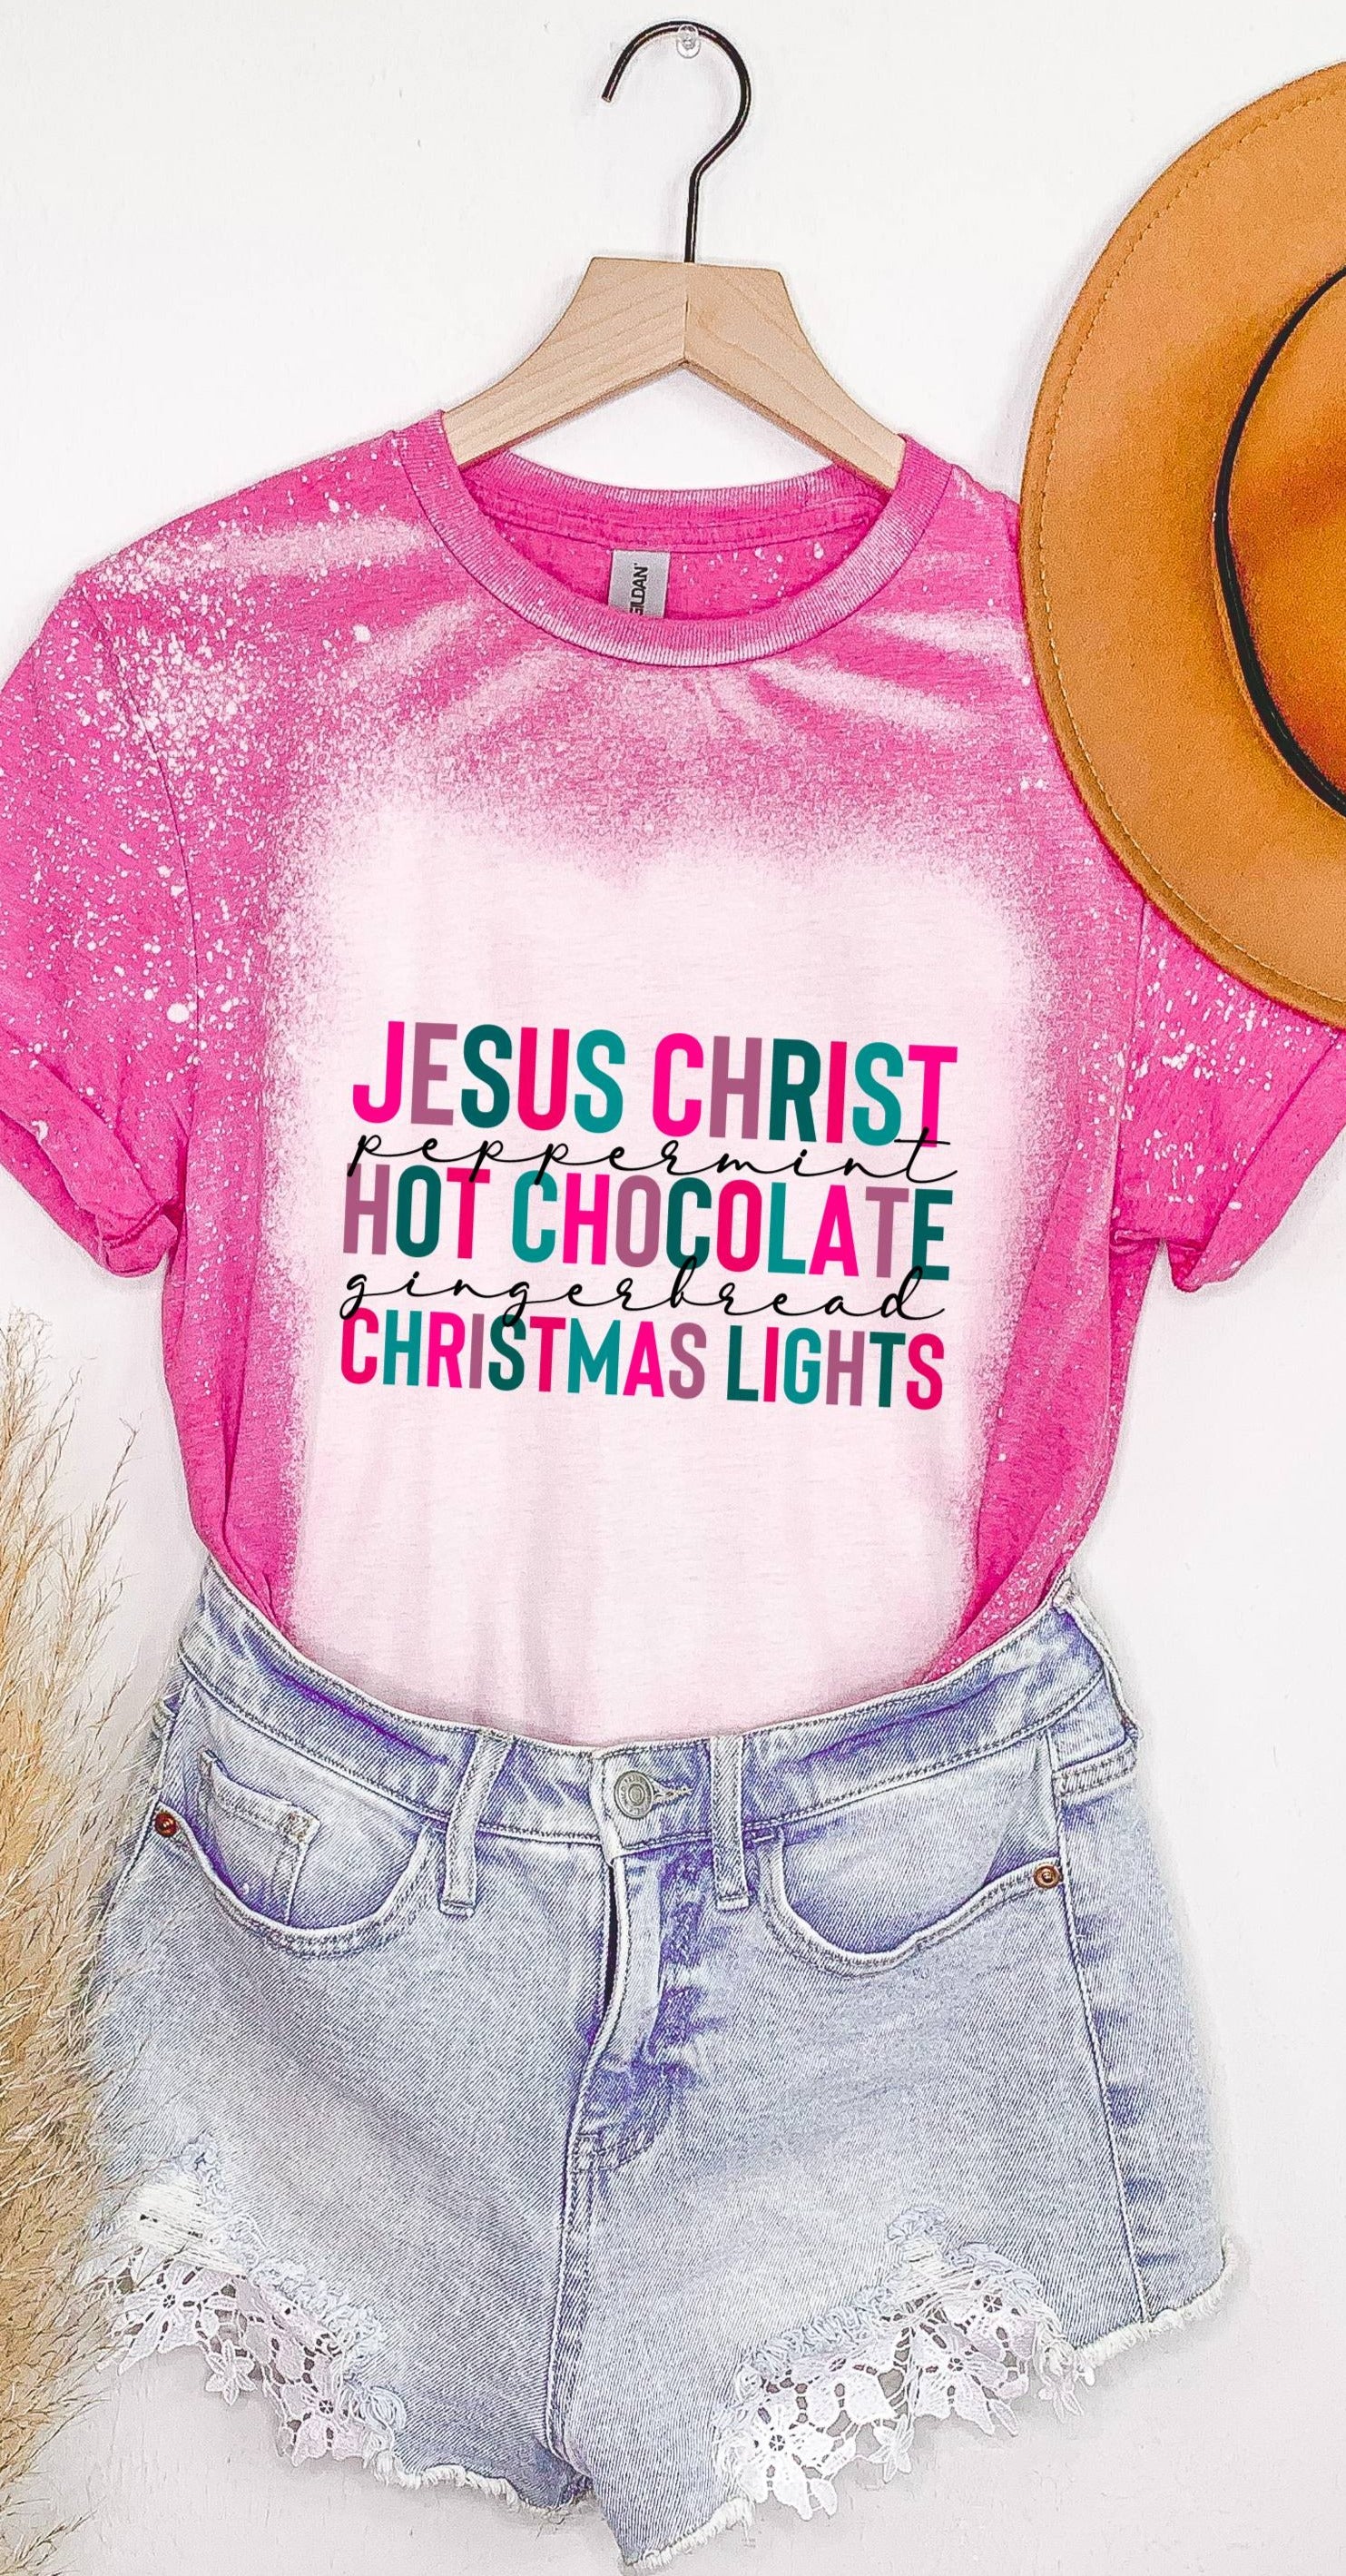 Looking for a trending christian Christmas shirt? This cute "Jesus Christ, Hot Chocolate and Christmas Lights" shirt will add color to the new Christmas season. You have several style off shirts to choose from just note that each style and color is subject to change.